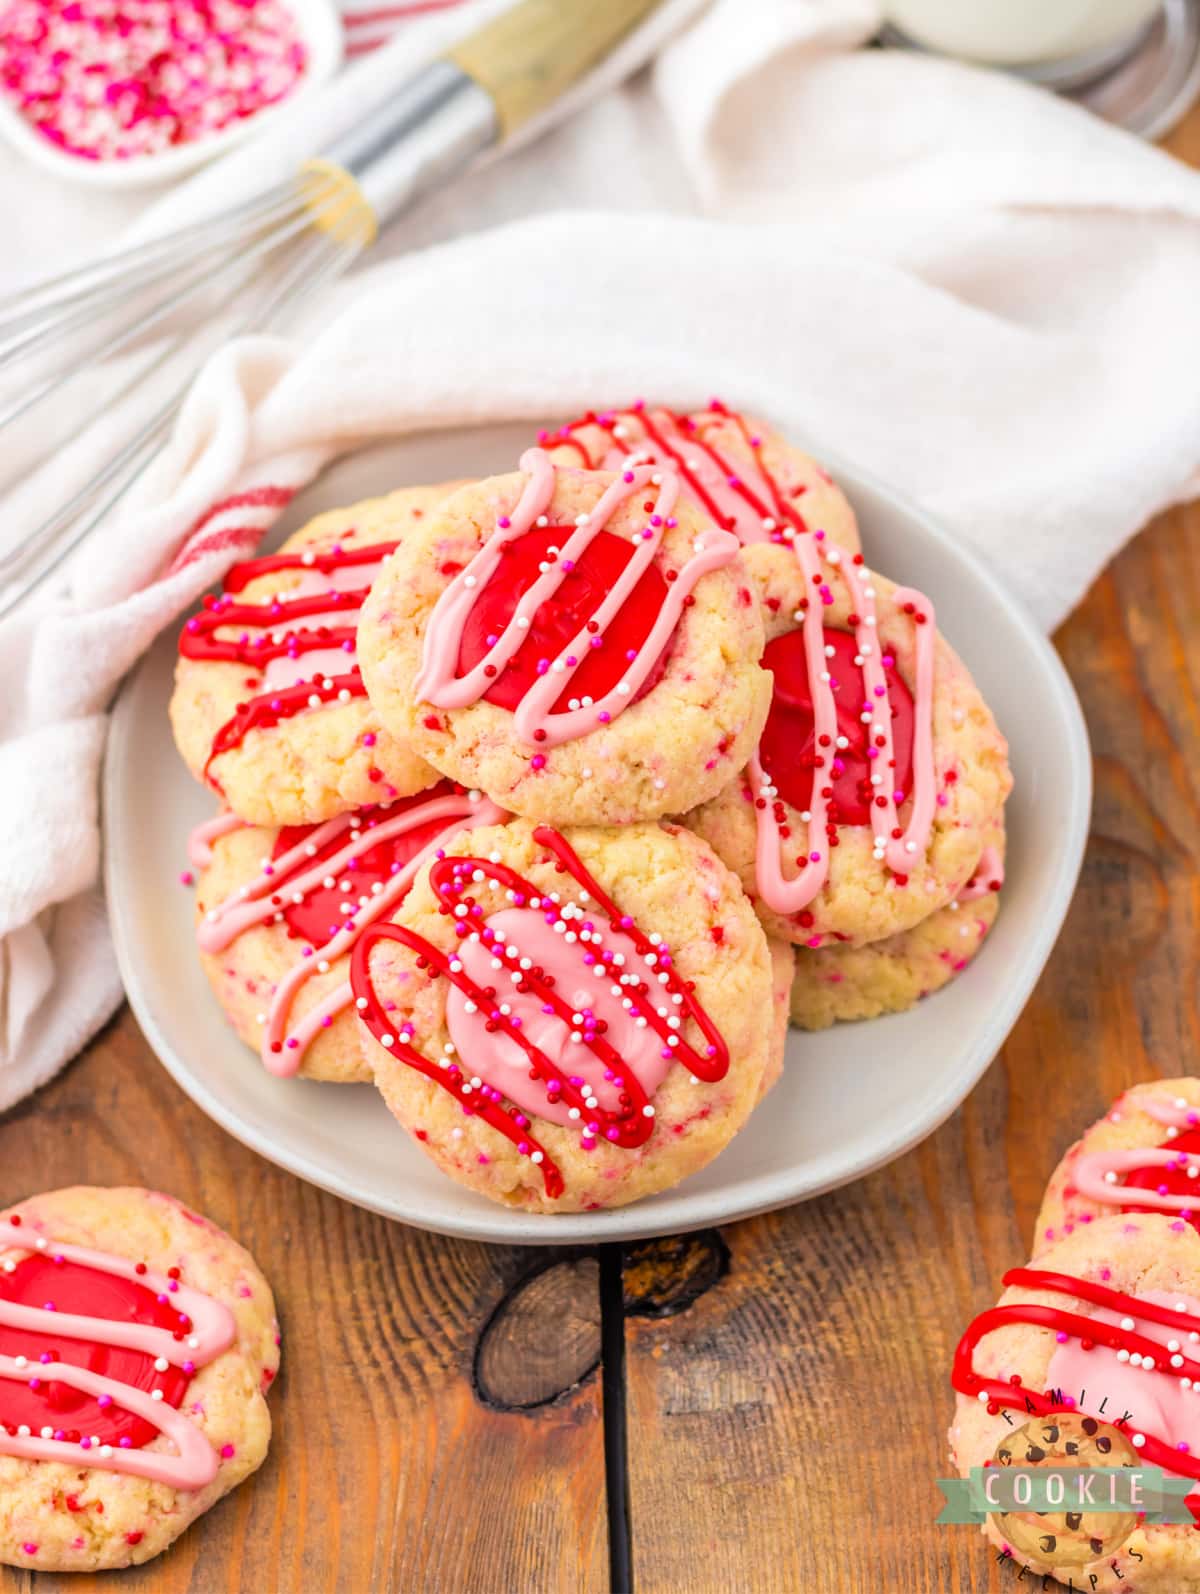 Plate of pink and red cookies.